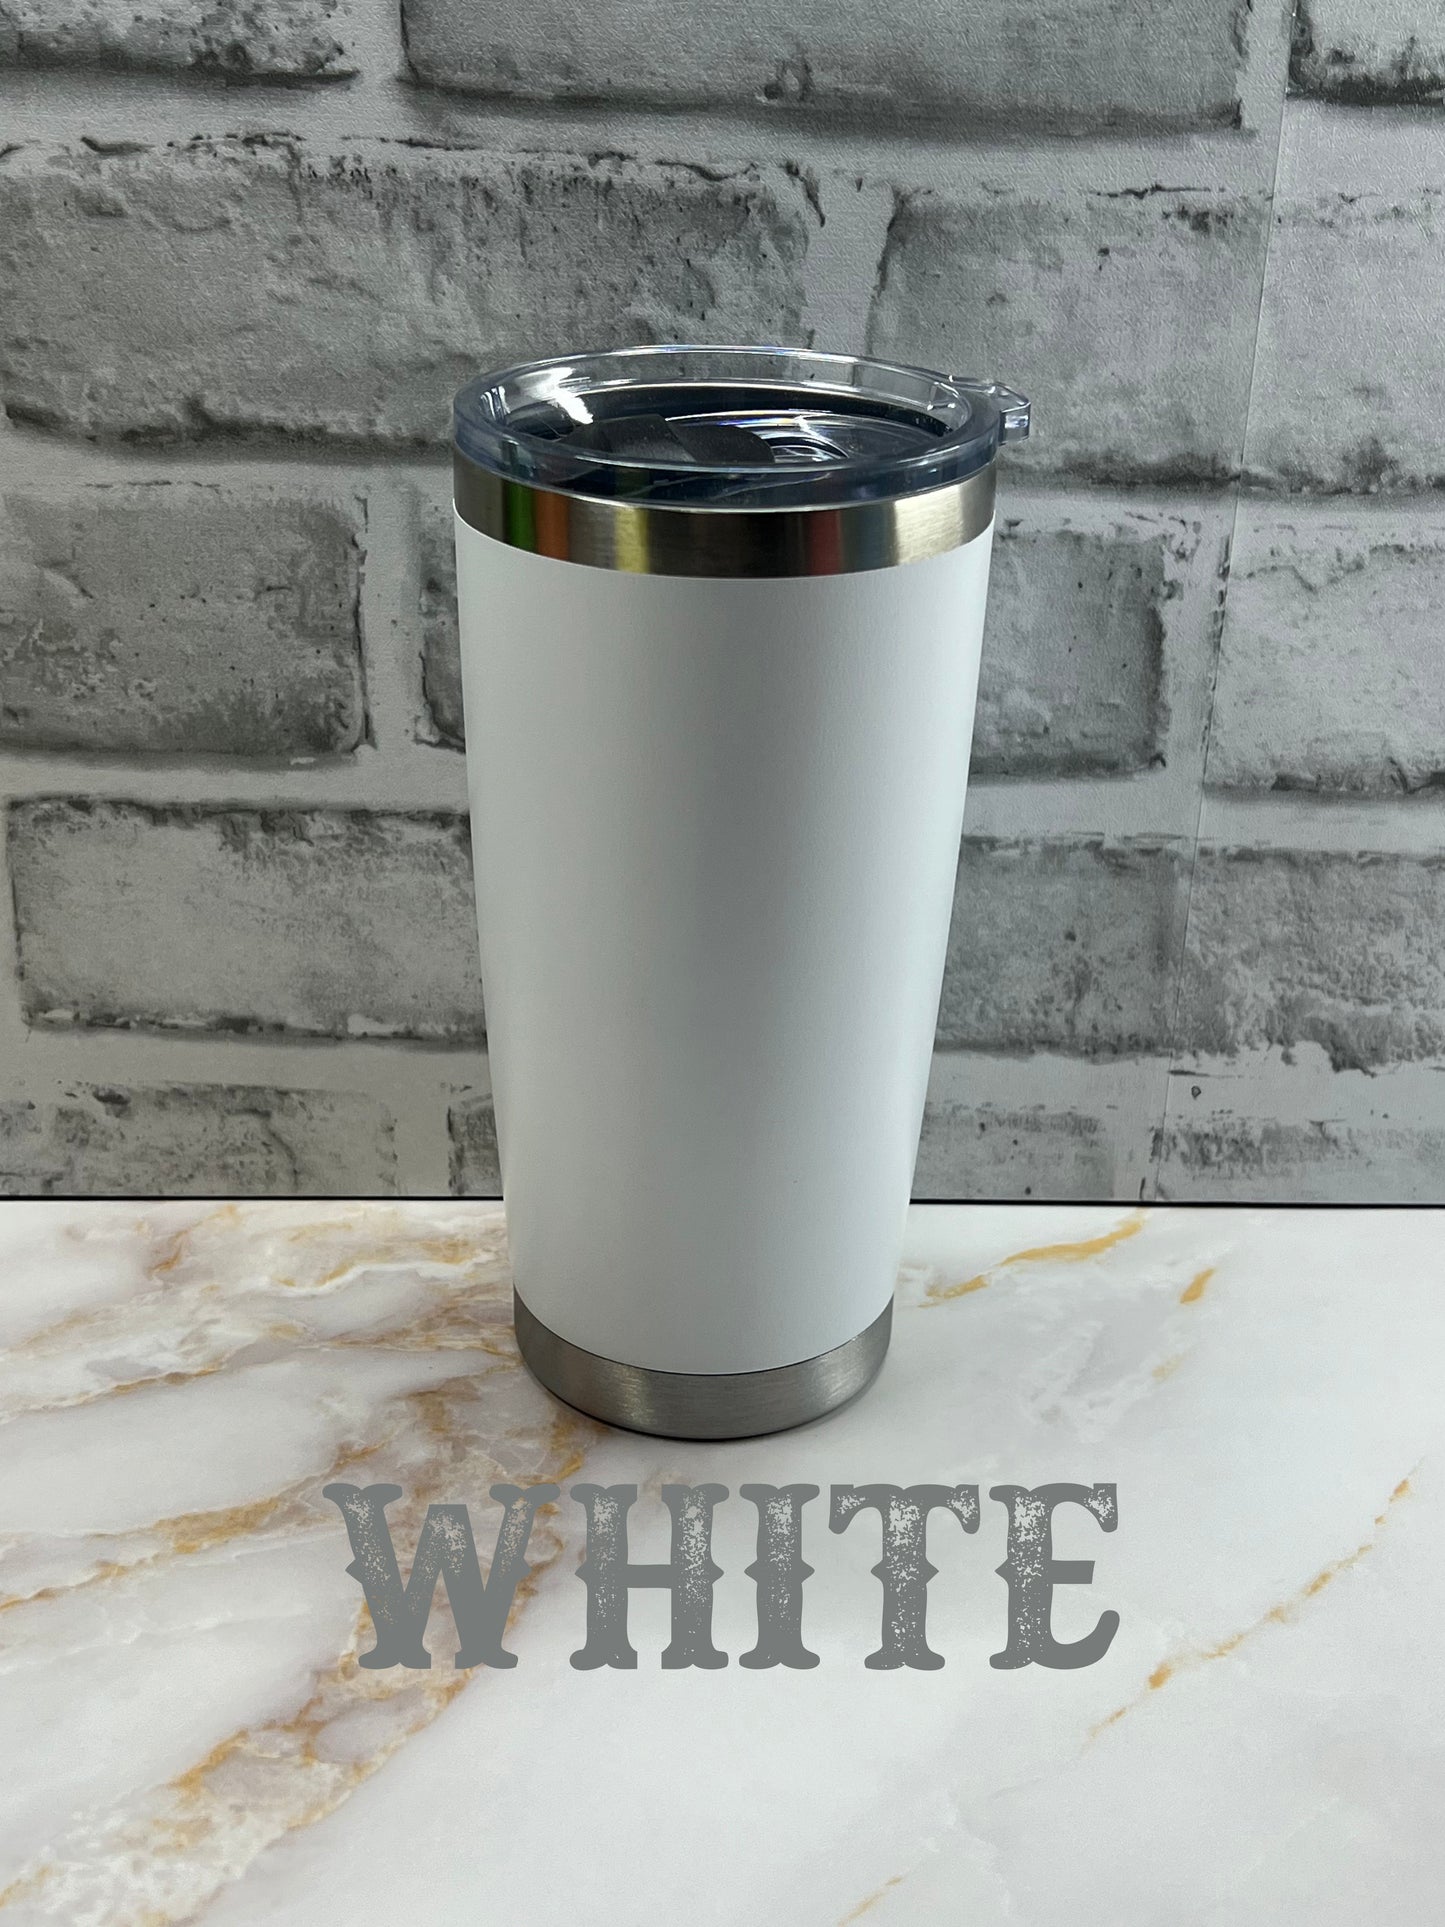 Rwp | Personalized 20oz Tumbler, ADD YOUR LOGO, Wholesale Tumblers, Free Laser Engraved Cup, Cooperate Gift, Branded, Powder Coated